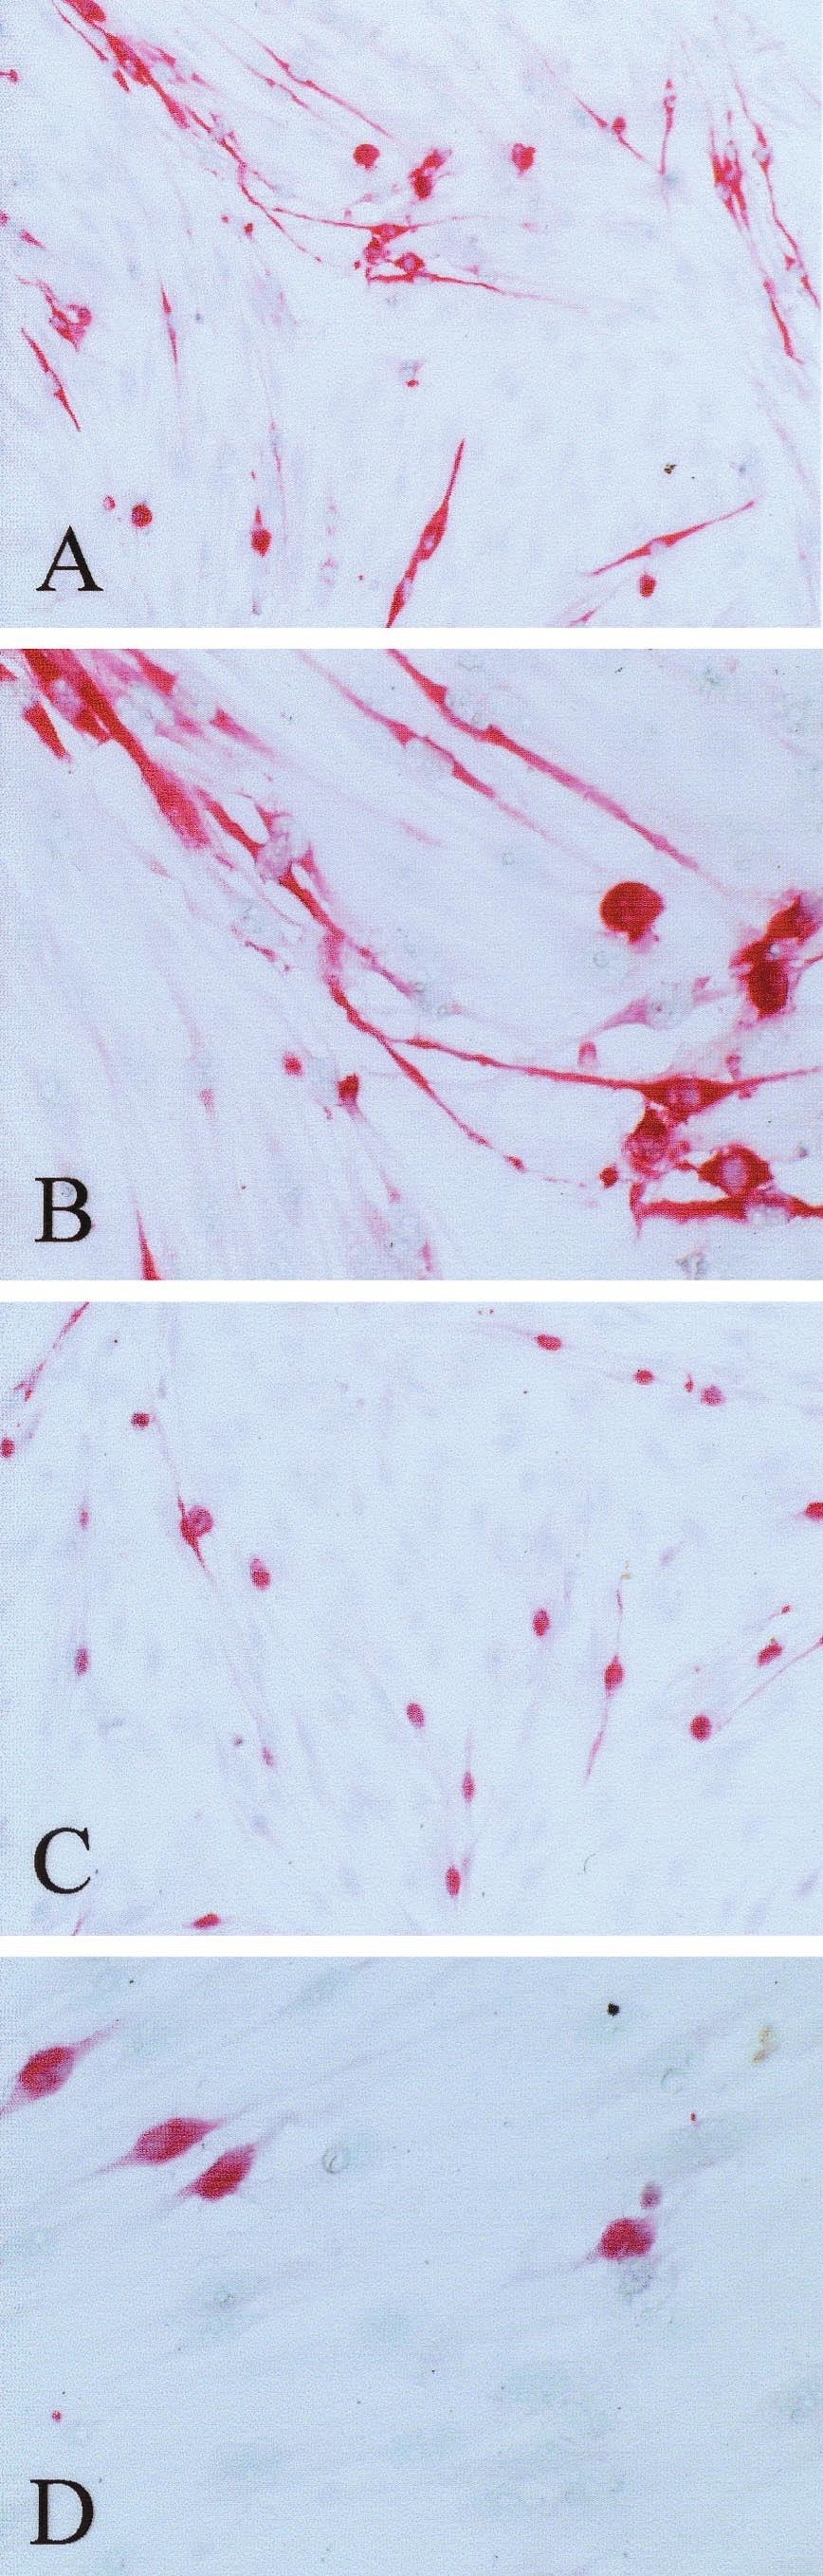 VOL. 75, 2001 ENDOTHELIAL CELL PLAQUE ASSAY FOR KSHV 5621 firmed that almost all spindle cells in late nodular KS lesions express LANA1.